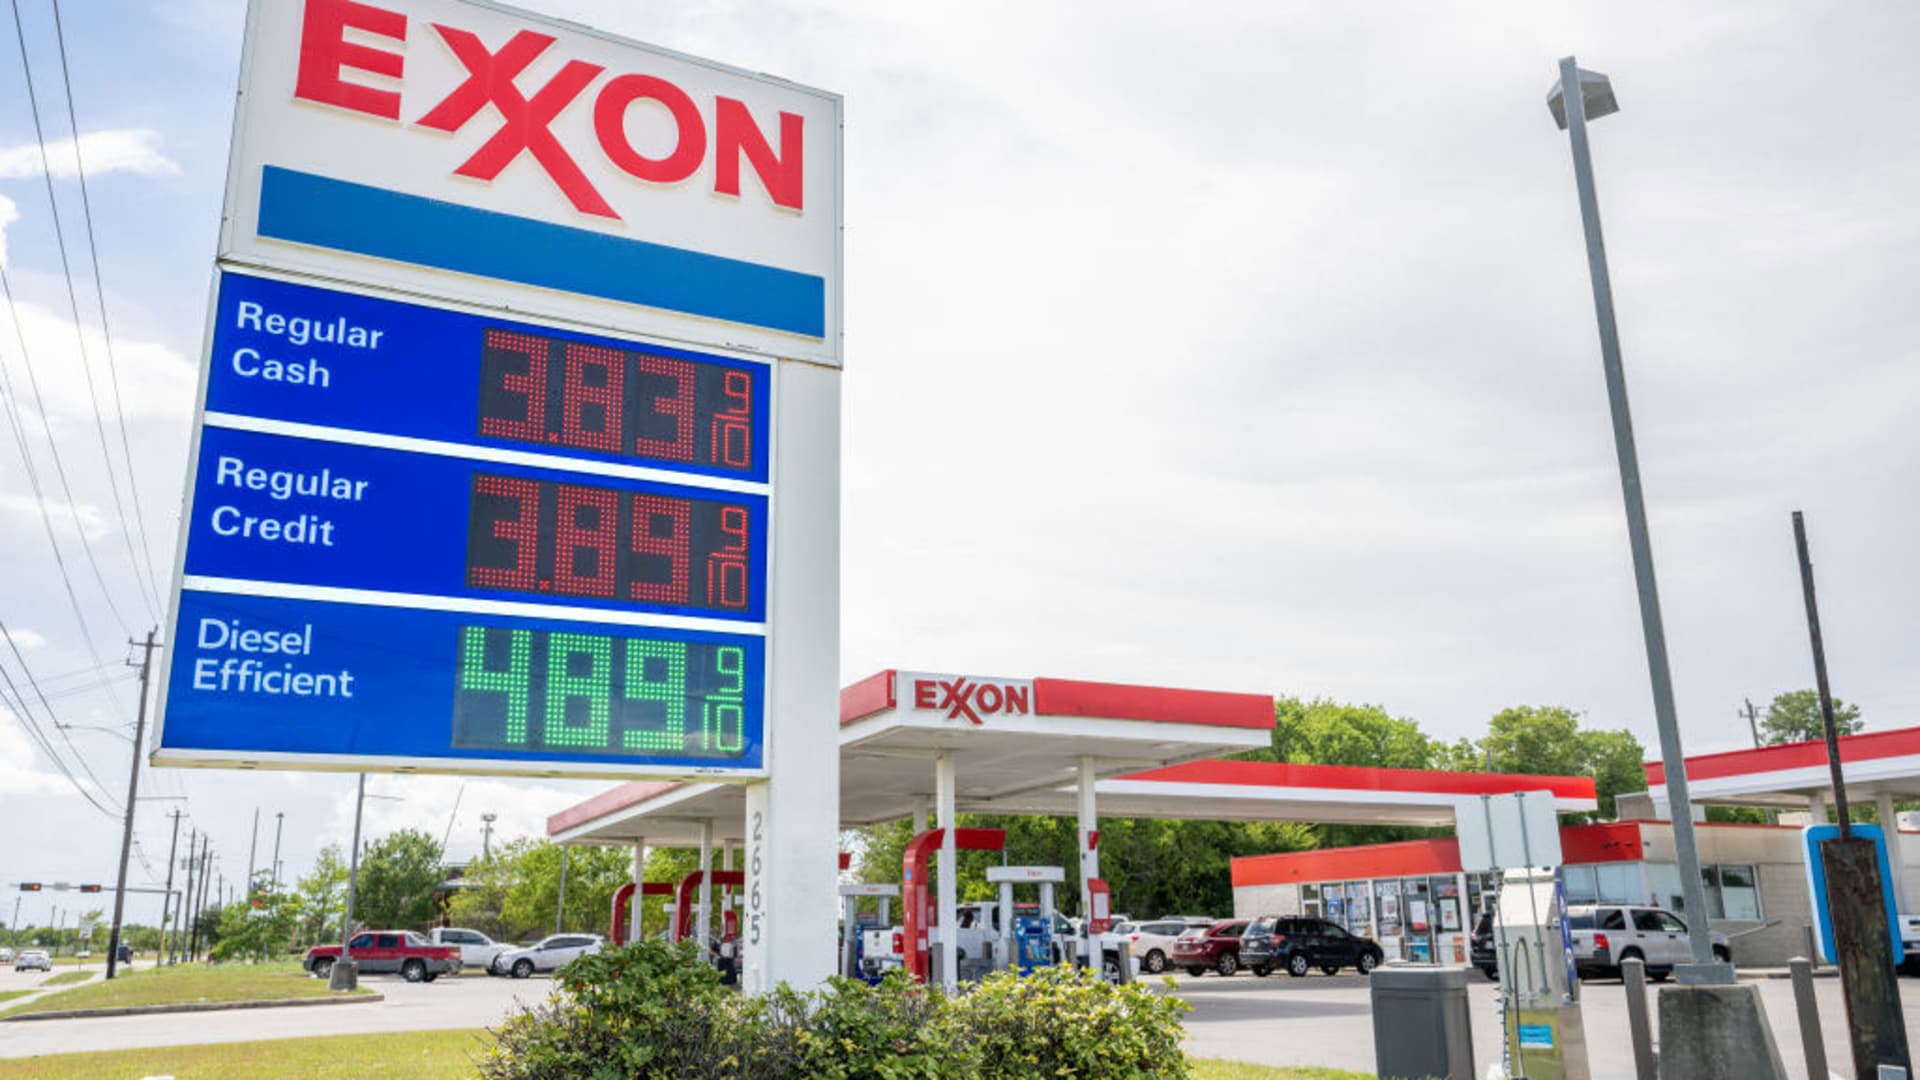 Exxon predicted global warming with remarkable accuracy years ago, study shows